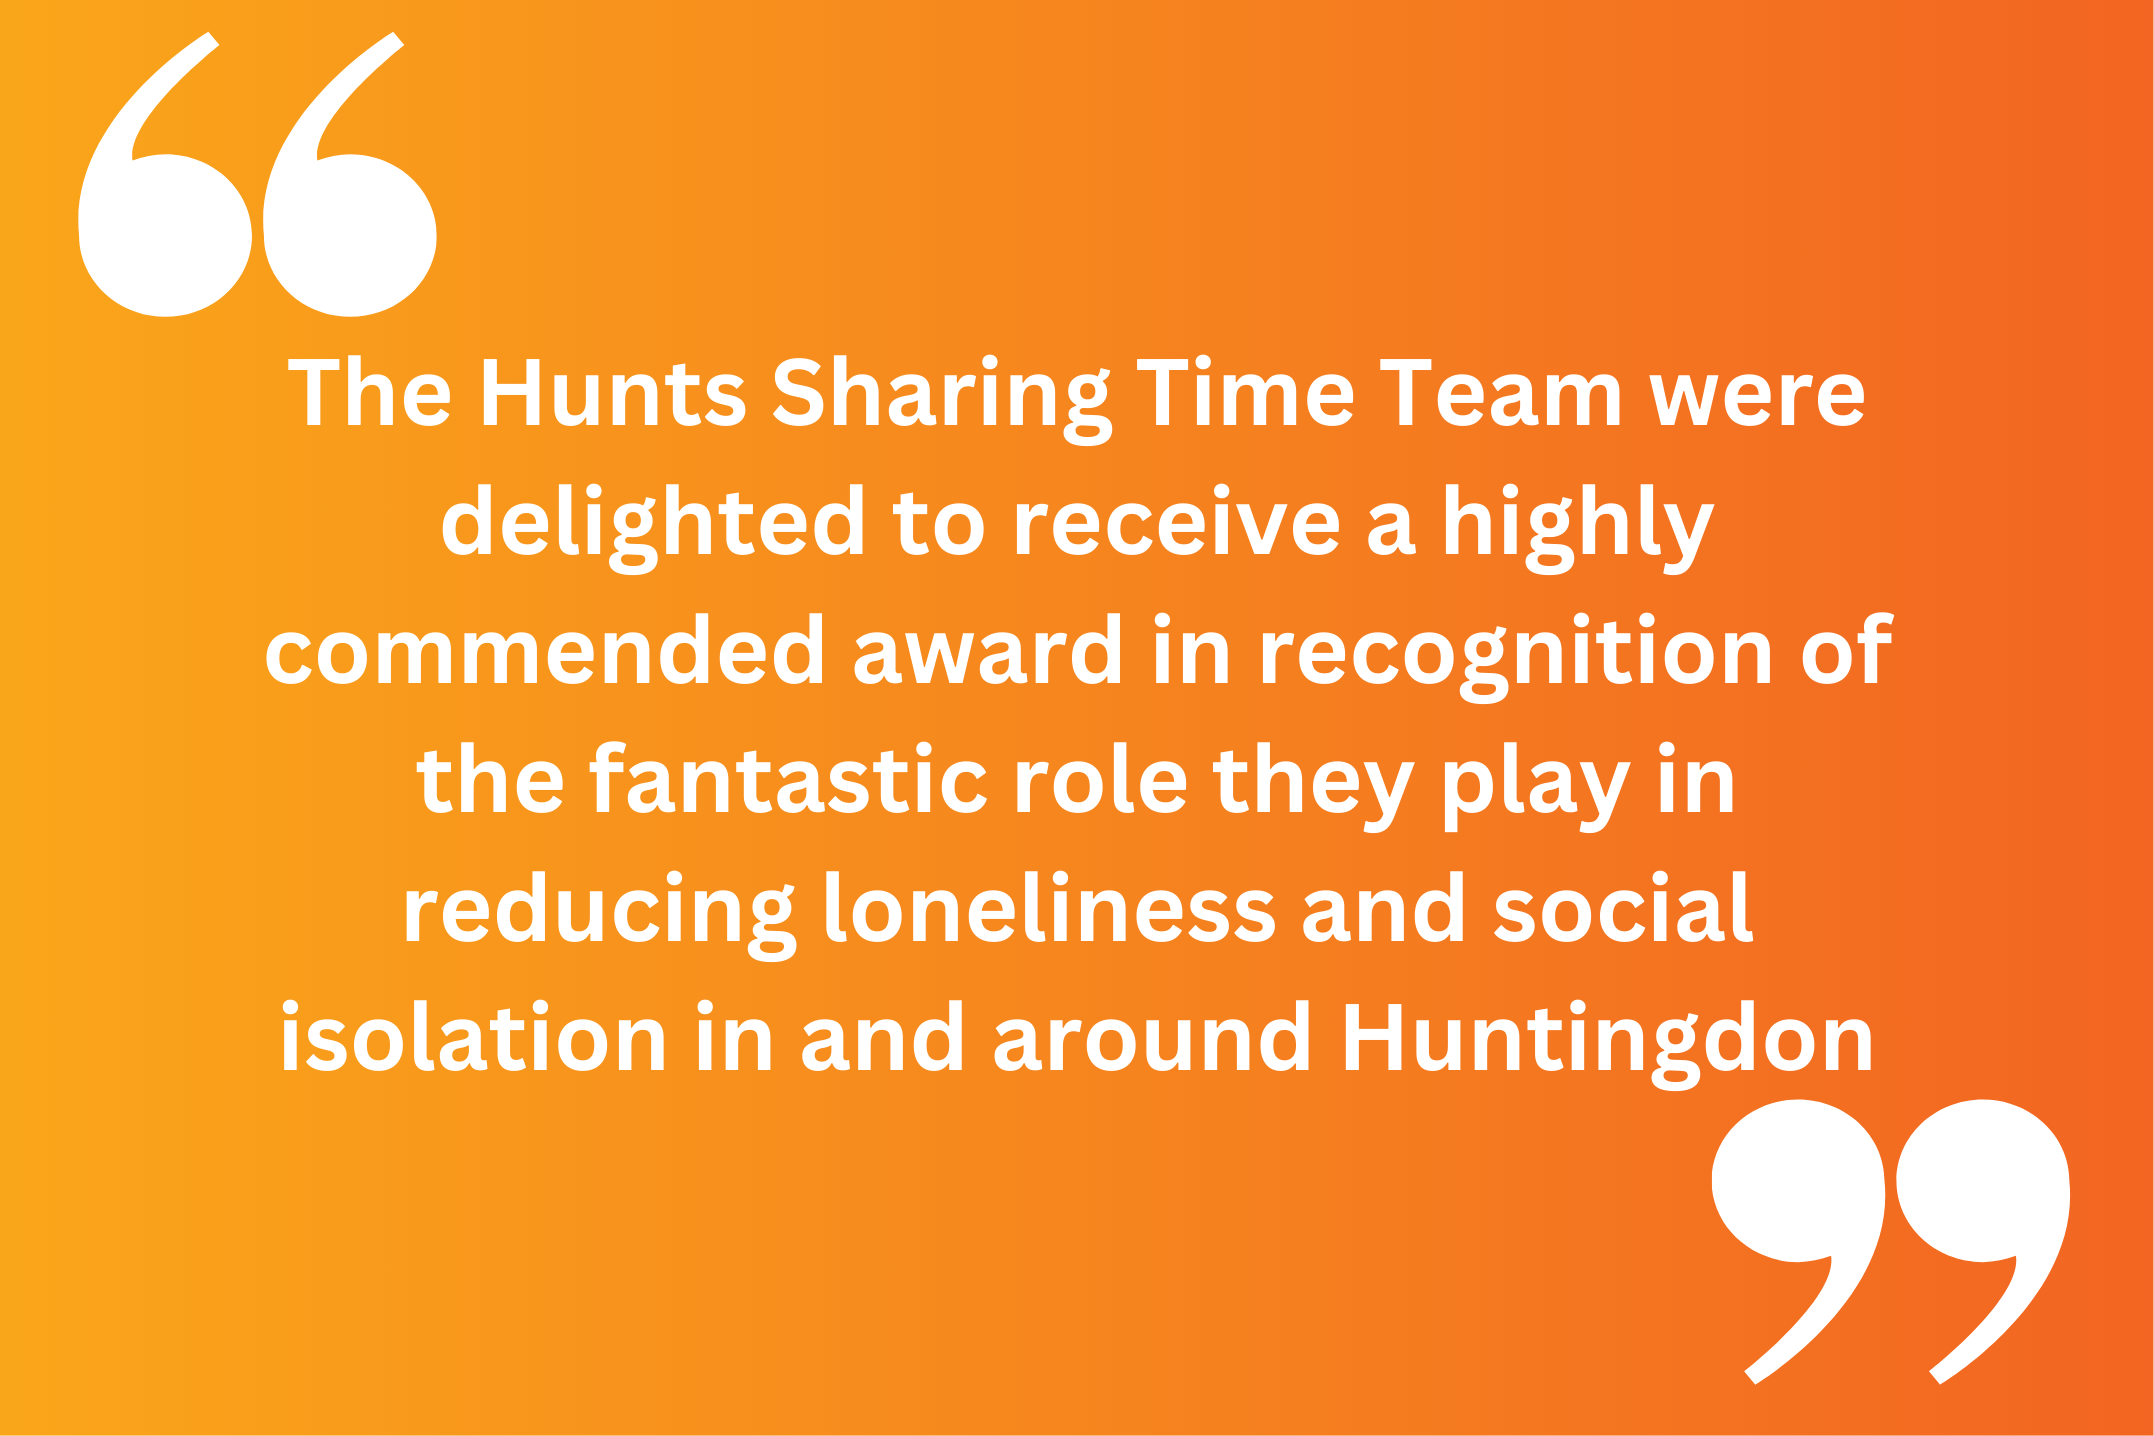 The Hunts Sharing Time Team were delighted to receive a highly commended award in recognition of the fantastic role they play in reducing loneliness and social isolation in and around Huntingdon